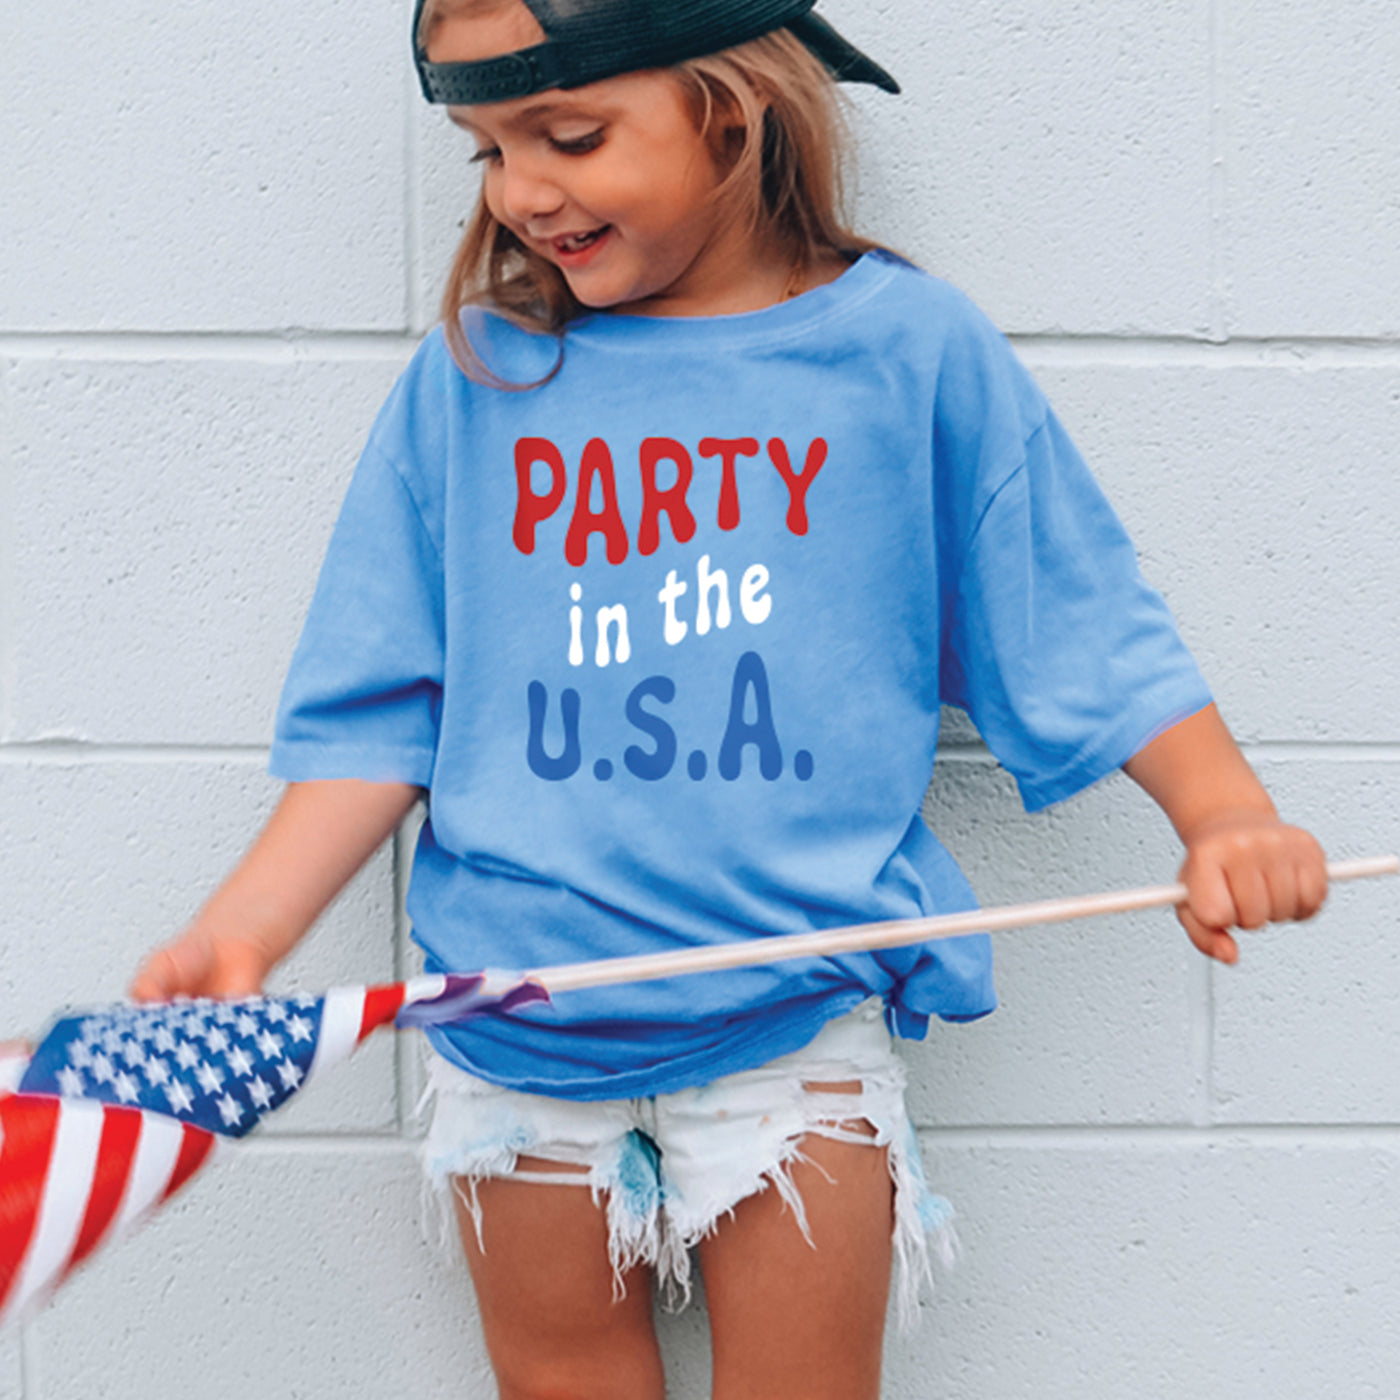 Little girl wearing heather Blue toddler crew neck t-shirt with retro wavy red white and blue party in the USA print , standing outside holding american flag and wearing backwards hat